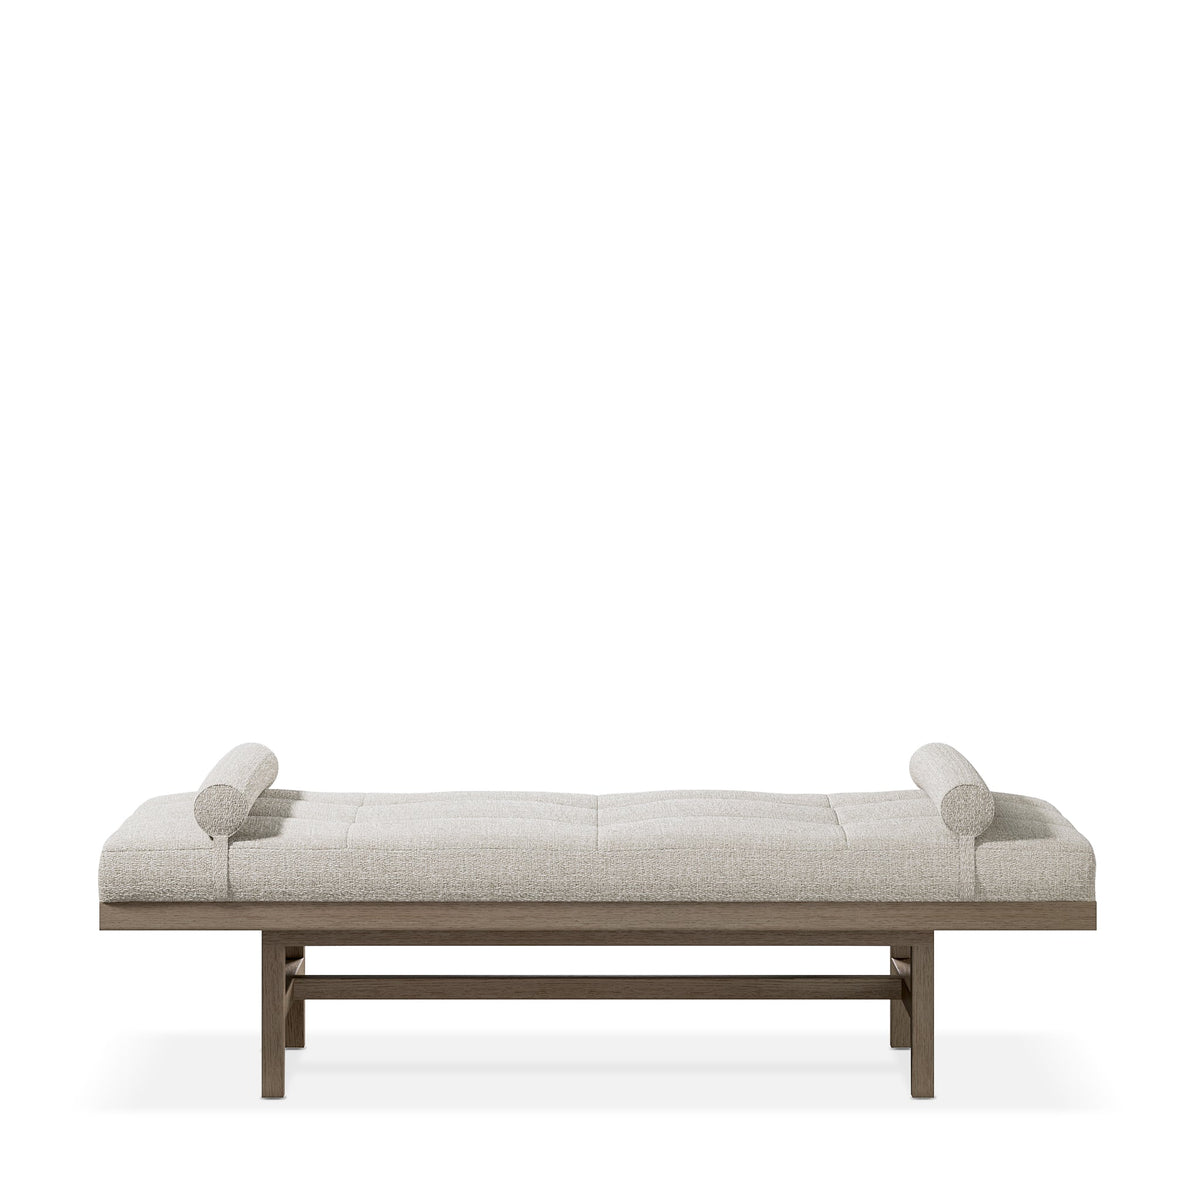 RUMBA DAYBED 100